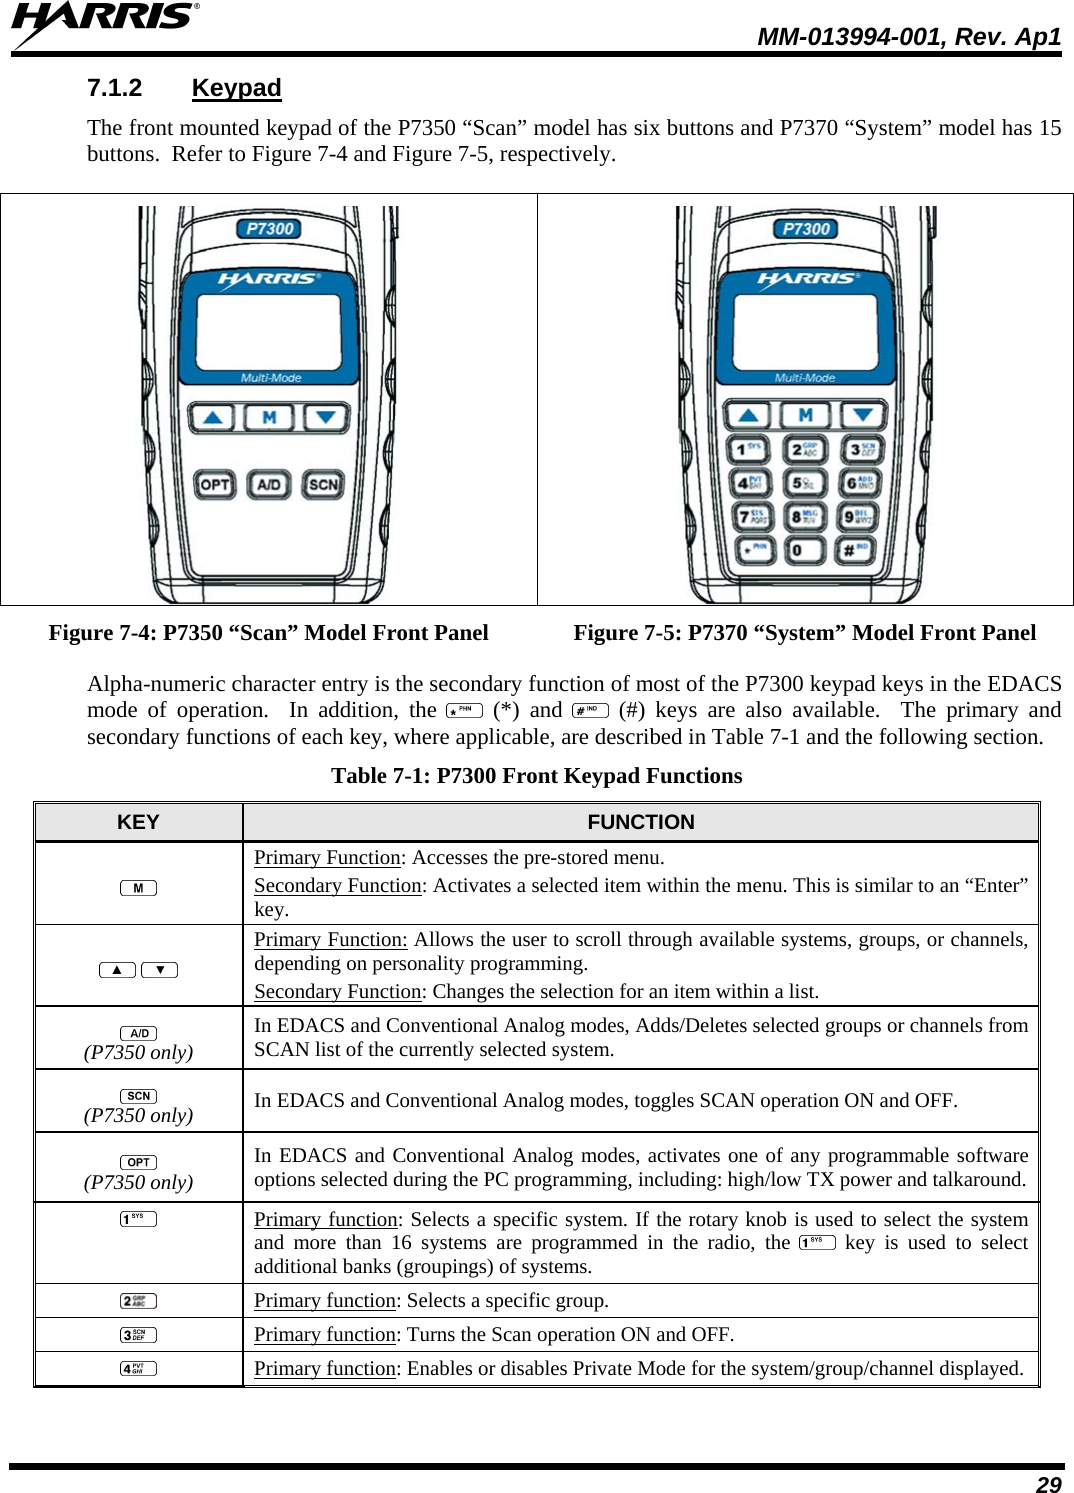  MM-013994-001, Rev. Ap1 29 7.1.2 Keypad The front mounted keypad of the P7350 “Scan” model has six buttons and P7370 “System” model has 15 buttons.  Refer to Figure 7-4 and Figure 7-5, respectively.     Figure 7-4: P7350 “Scan” Model Front Panel  Figure 7-5: P7370 “System” Model Front Panel Alpha-numeric character entry is the secondary function of most of the P7300 keypad keys in the EDACS mode of operation.  In addition, the   (*) and   (#) keys are also available.  The primary and secondary functions of each key, where applicable, are described in Table 7-1 and the following section. Table 7-1: P7300 Front Keypad Functions KEY  FUNCTION  Primary Function: Accesses the pre-stored menu.  Secondary Function: Activates a selected item within the menu. This is similar to an “Enter” key.    Primary Function: Allows the user to scroll through available systems, groups, or channels, depending on personality programming.  Secondary Function: Changes the selection for an item within a list.  (P7350 only) In EDACS and Conventional Analog modes, Adds/Deletes selected groups or channels from SCAN list of the currently selected system.    (P7350 only) In EDACS and Conventional Analog modes, toggles SCAN operation ON and OFF.    (P7350 only) In EDACS and Conventional Analog modes, activates one of any programmable software options selected during the PC programming, including: high/low TX power and talkaround.   Primary function: Selects a specific system. If the rotary knob is used to select the system and more than 16 systems are programmed in the radio, the   key is used to select additional banks (groupings) of systems.  Primary function: Selects a specific group.  Primary function: Turns the Scan operation ON and OFF.  Primary function: Enables or disables Private Mode for the system/group/channel displayed. 